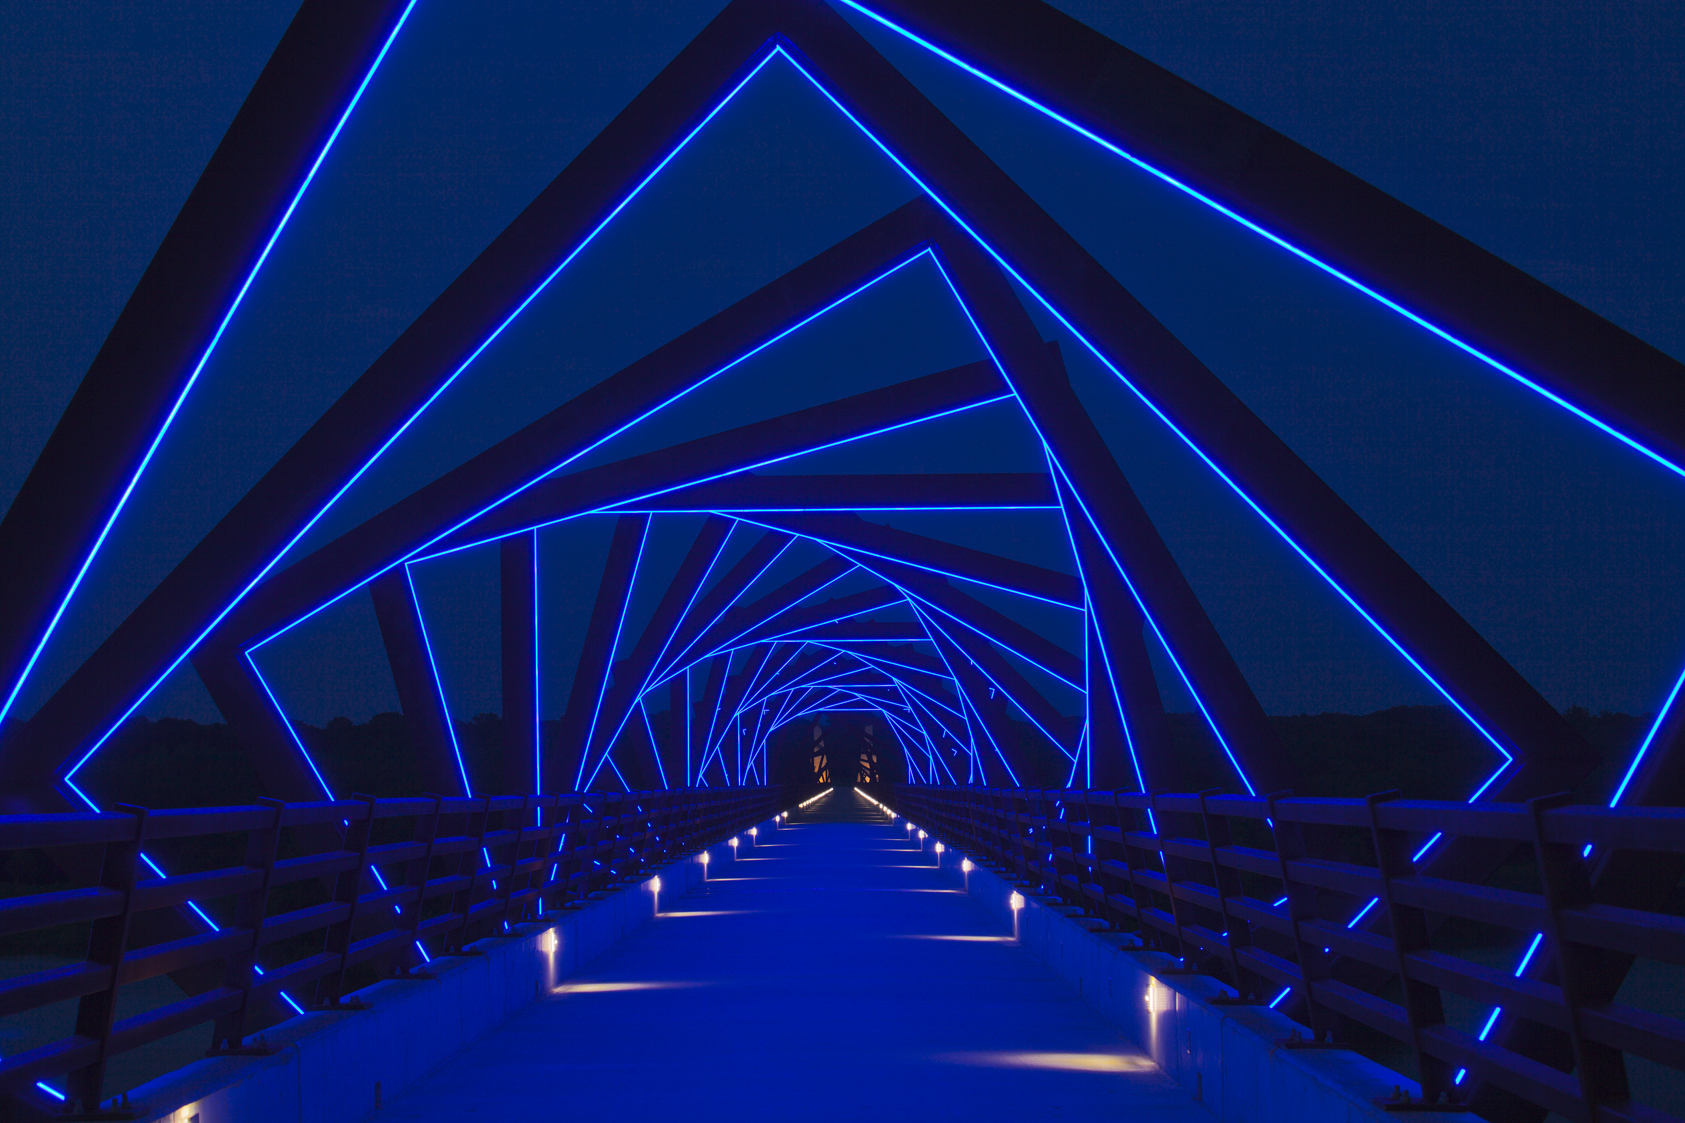 From Here To There : The High Trestle Trail Bridge